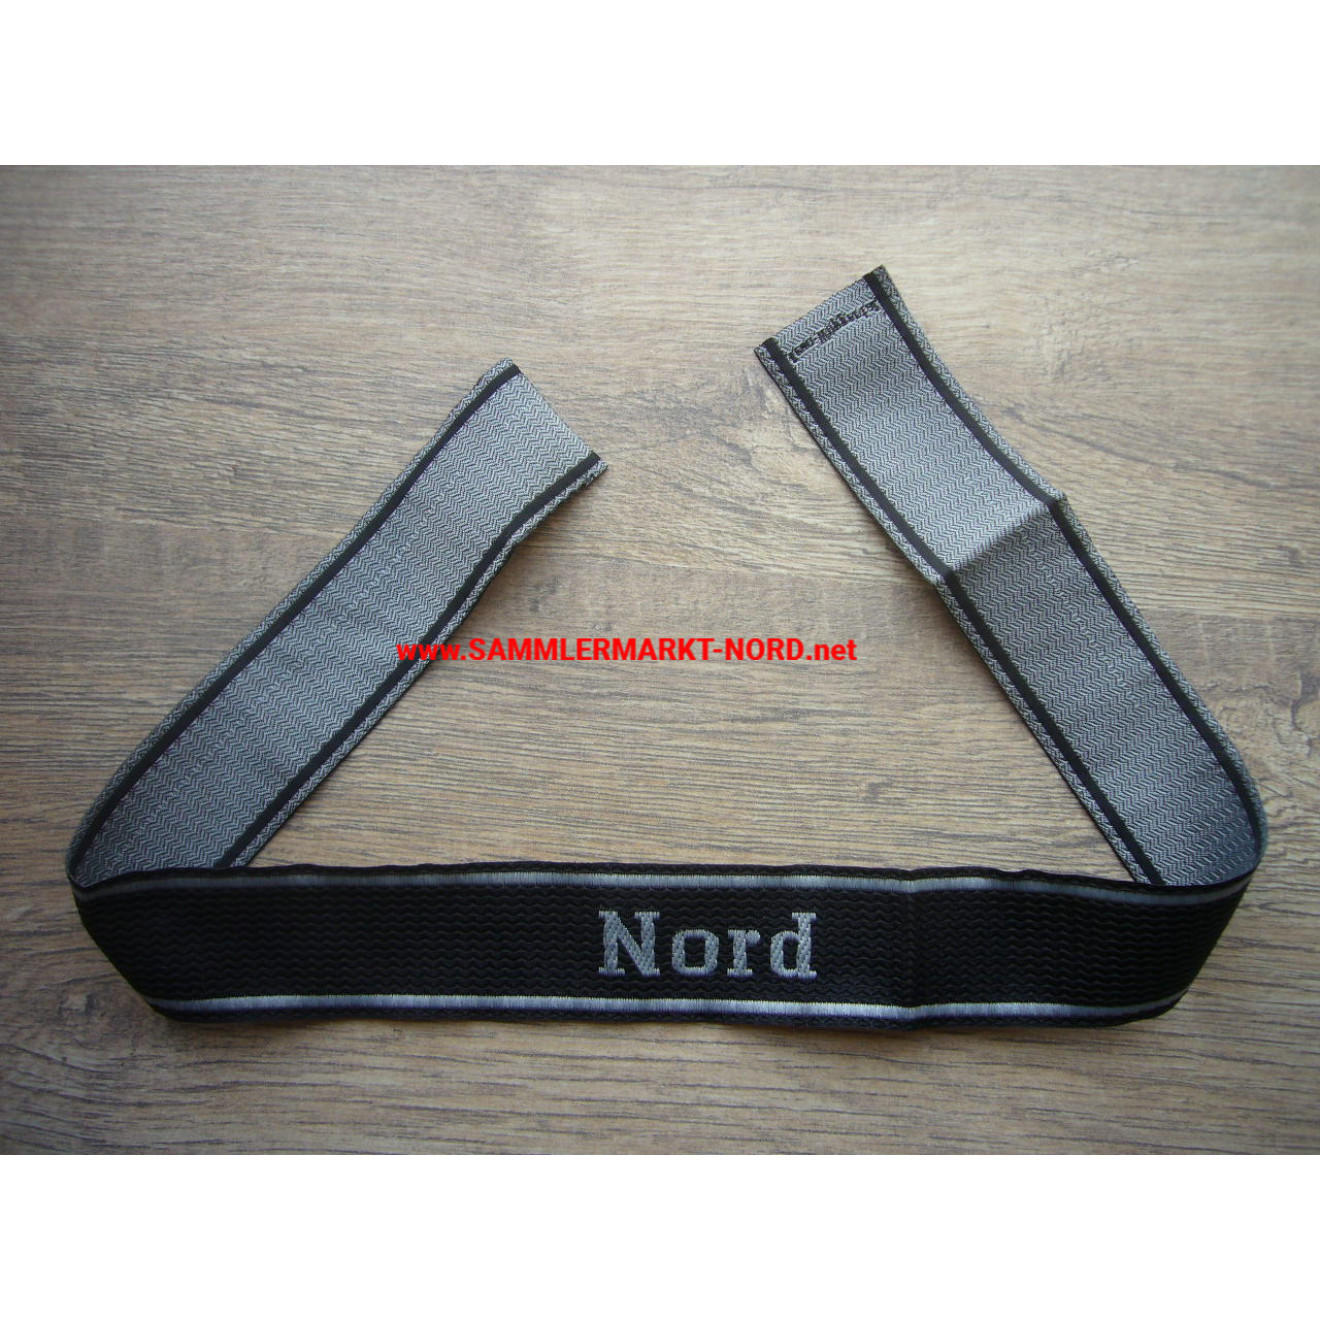 Waffen-SS - Cuff title Nord (Nordland)